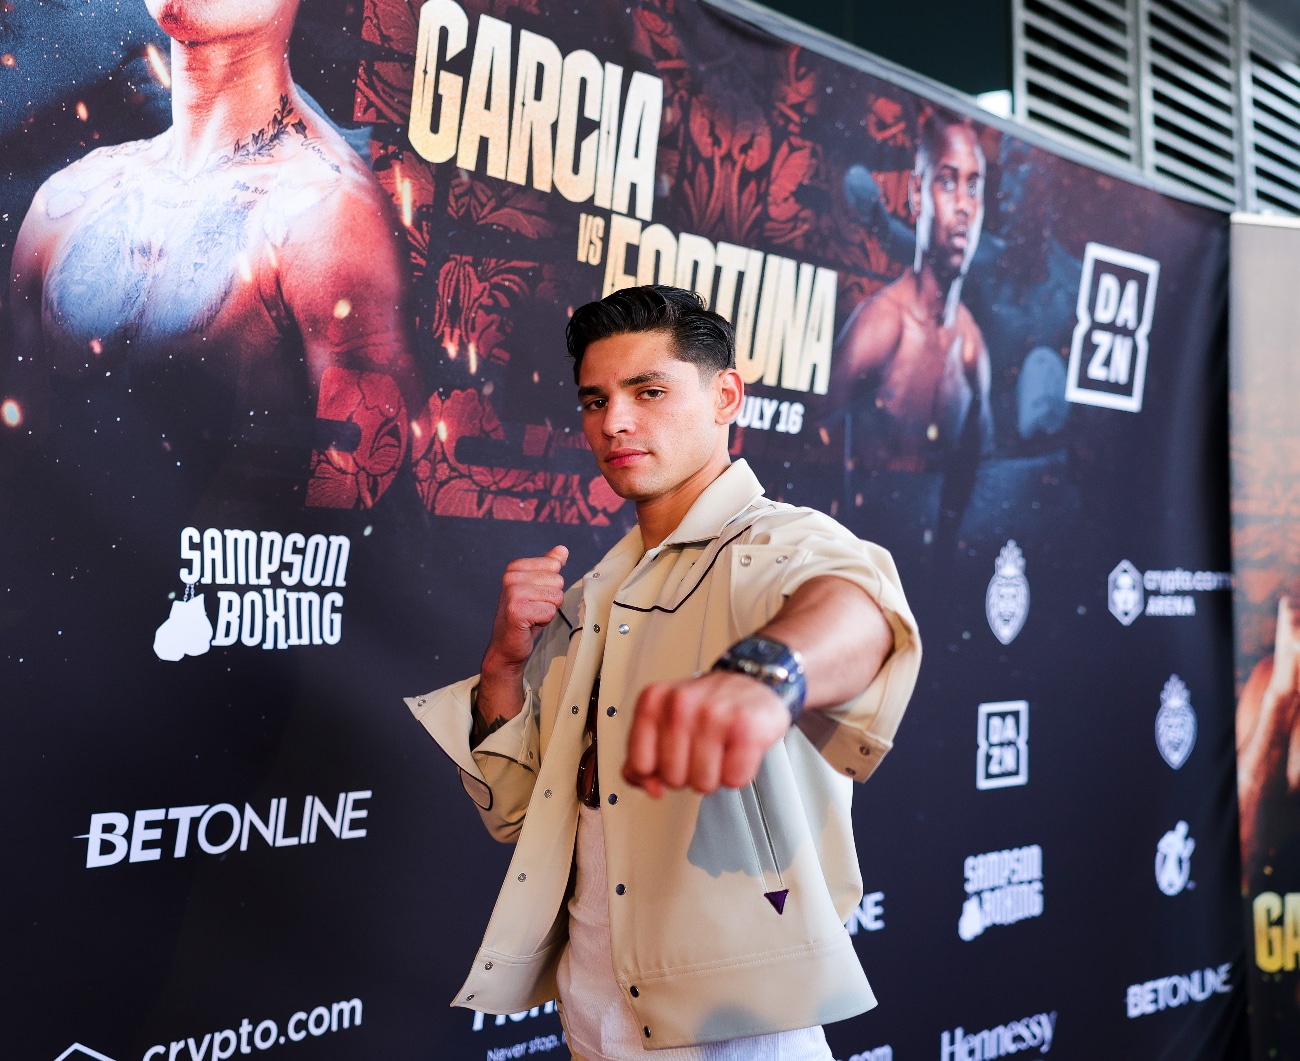 Image: Ryan Garcia faces tough test against Javier Fortuna on Saturday in Los Angeles